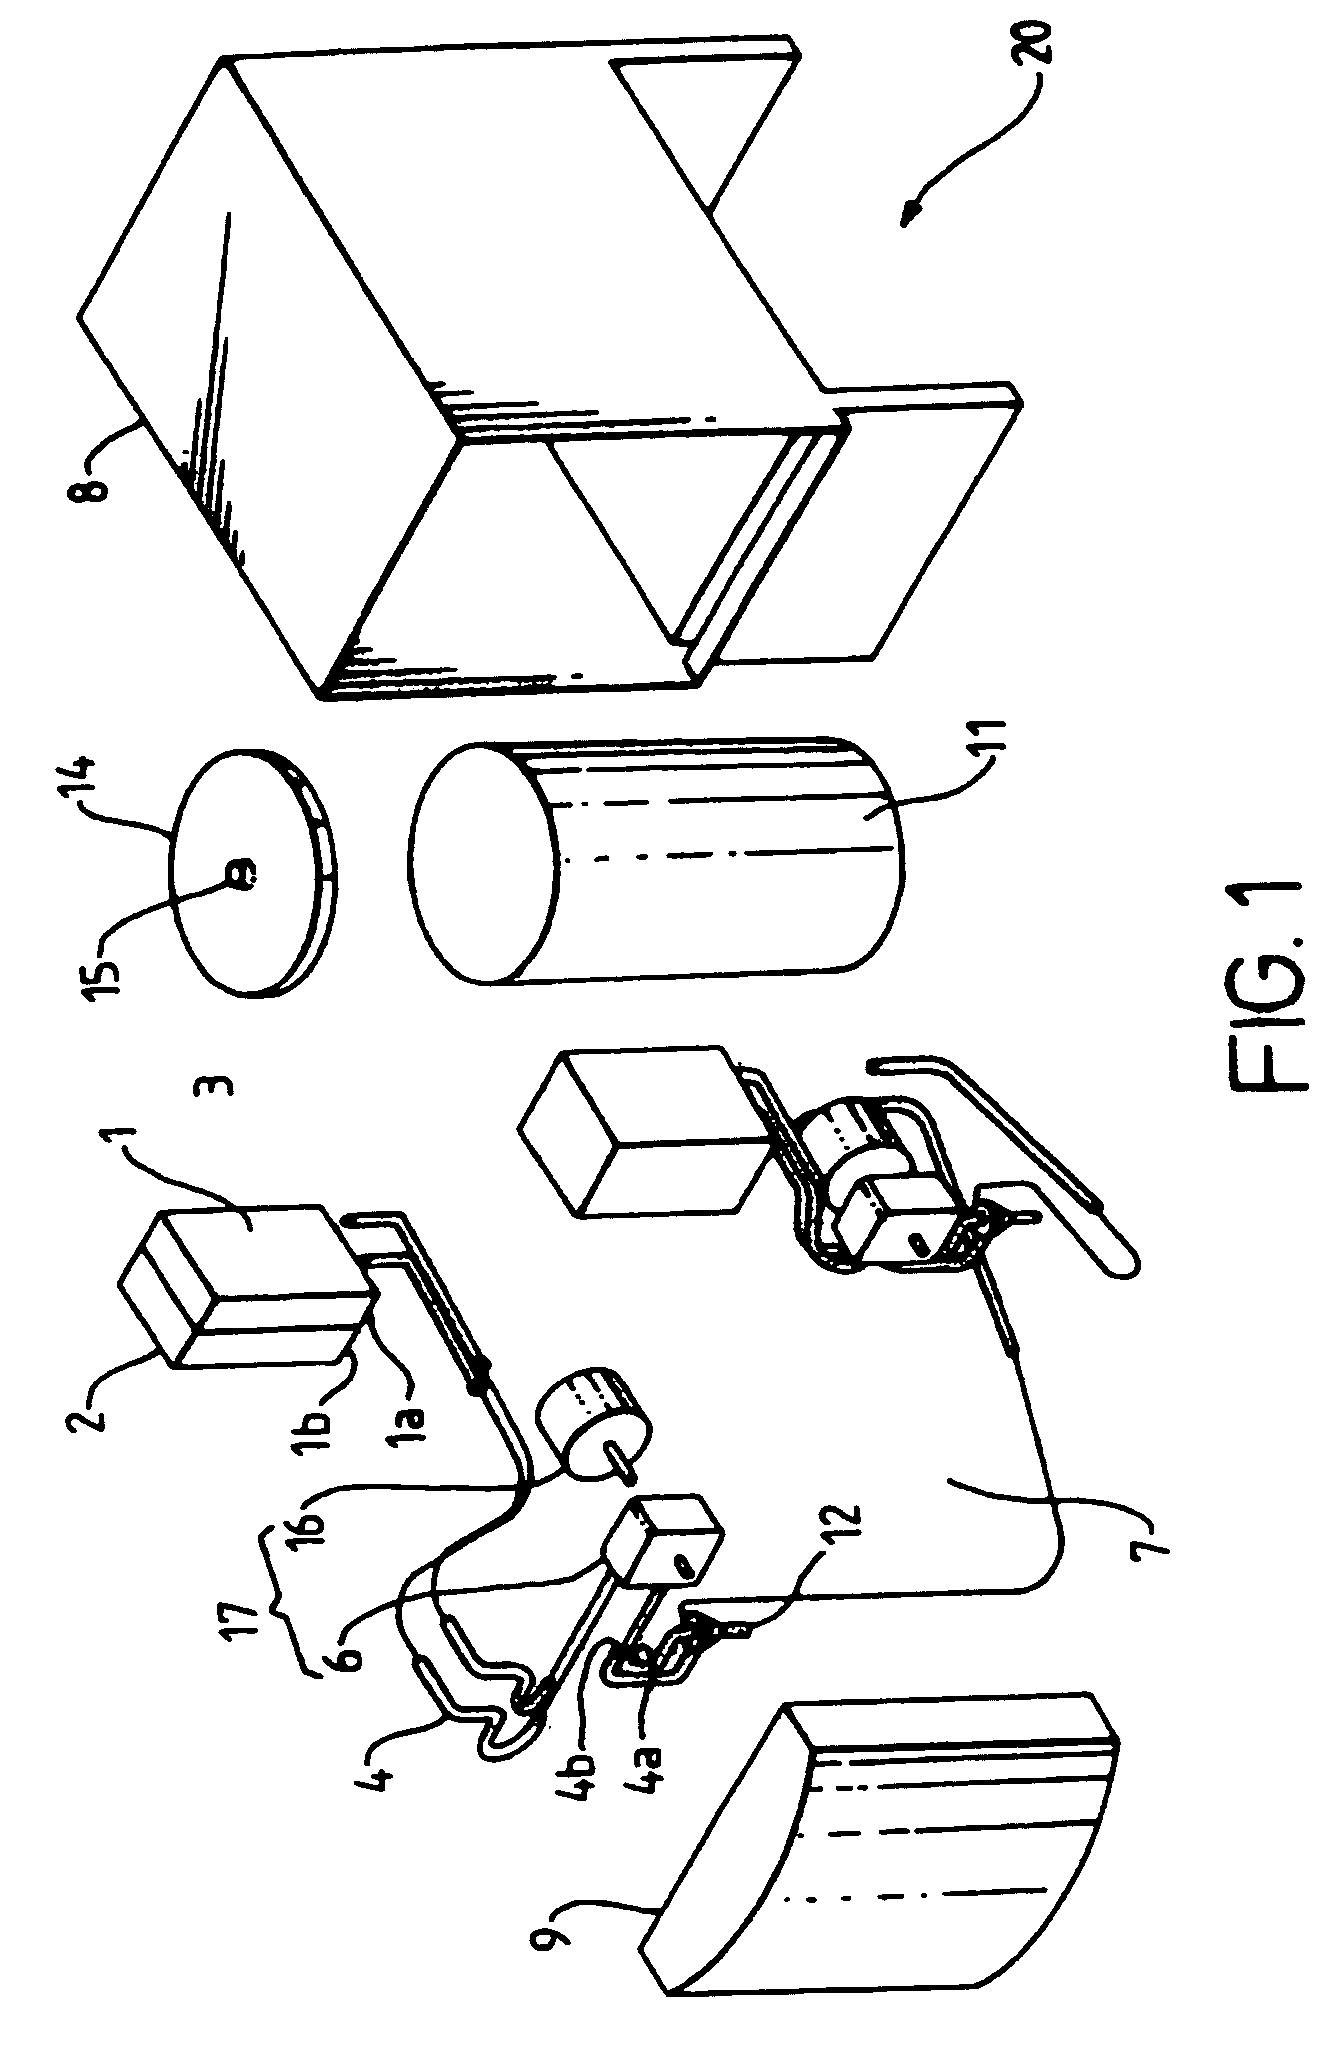 System for dispensing a liquid beverage concentrate